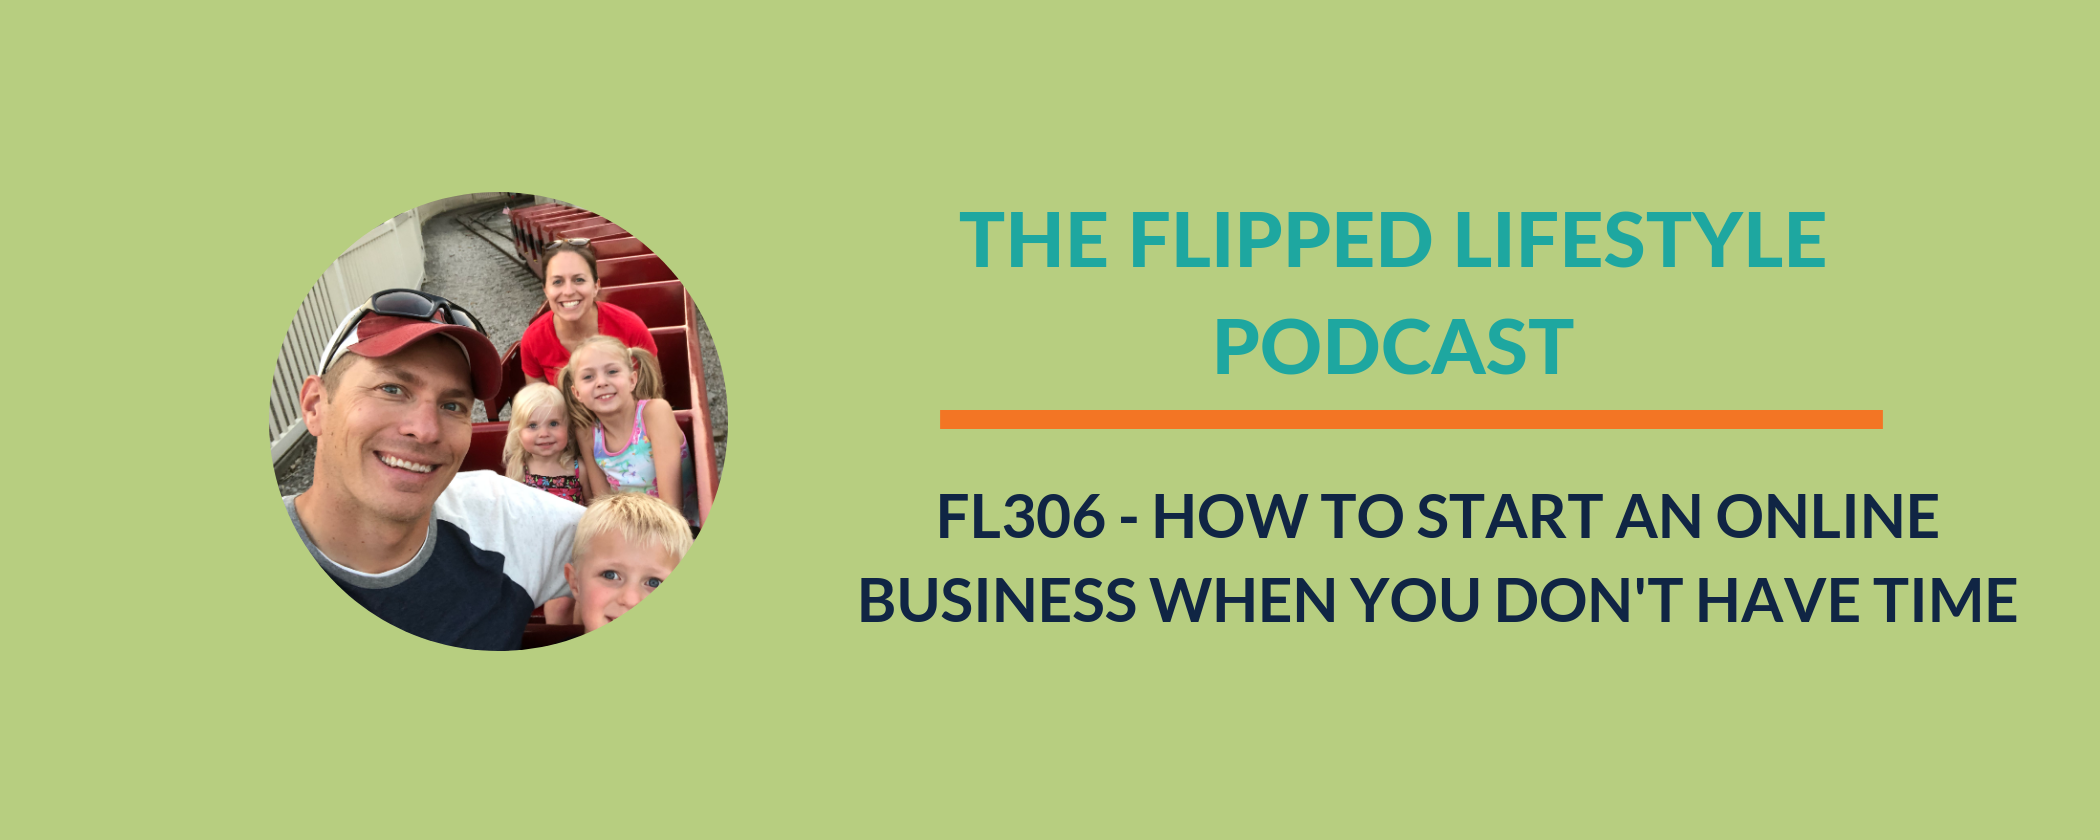 EARLY PODCAST: FL306 – How to Start an Online Business When You Don’t Have Time